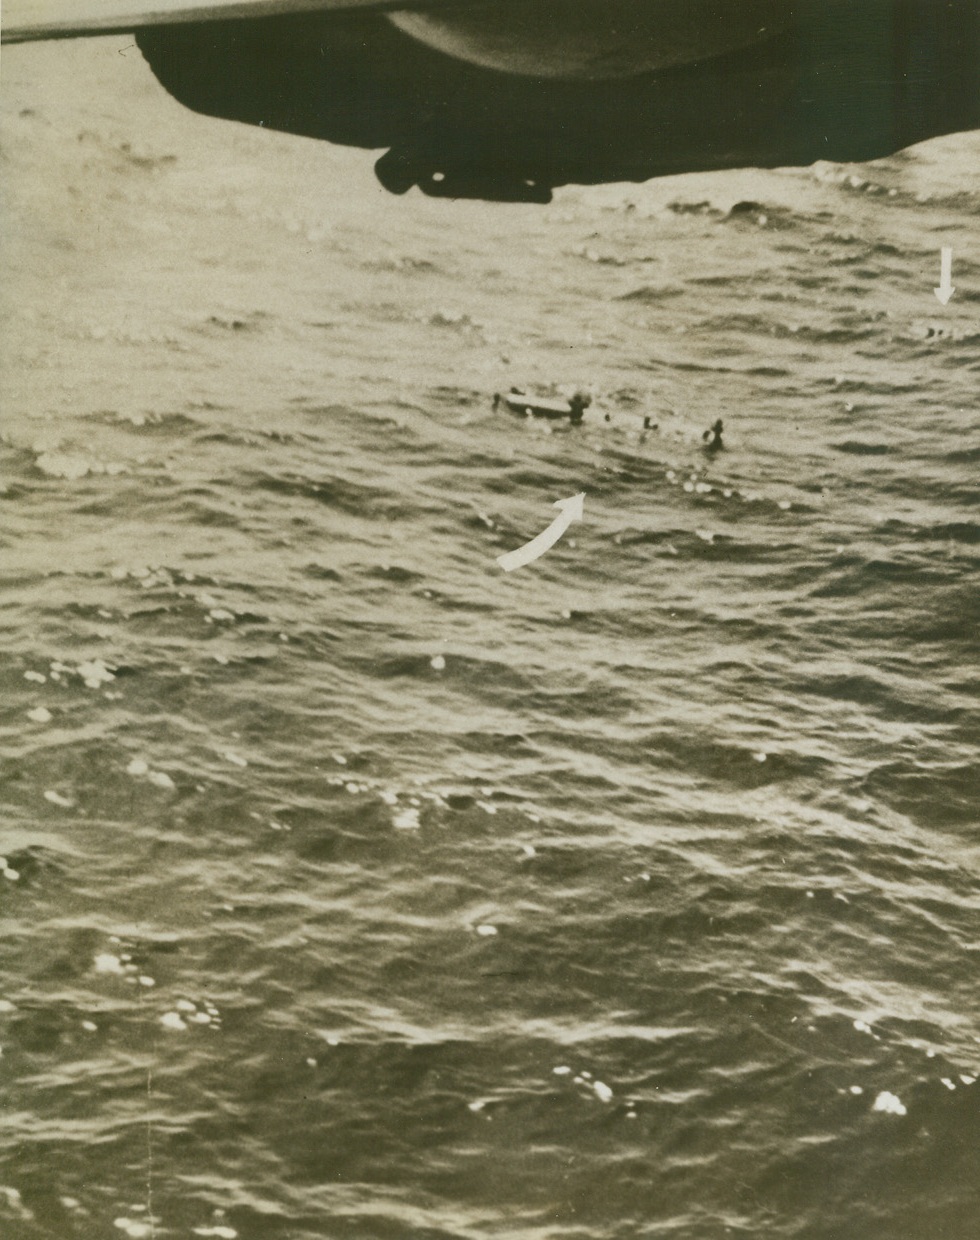 “Tidewater Tillie” Scores Again, 5/25/1943. The crew of a specially equipped Liberator B-24 bomber of the U.S. Army Air Forces anti-submarine command made this photo of a successful attack on a Nazi U-boat, proving they had scored a “kill”. Once before they had attacked an enemy sub and had been given credit for only a “probable”, because their photos hadn’t shown conclusively that the undersea boat was destroyed. This time, photos of the attack, and of the wreckage on the surface after the attack, made the “kill” a certainty. Here, after depth bombs from the plane had blasted the sub to the bottom, survivors of the crew cling to a cylindrical object, (left arrow), and others float in the water, (arrow far right):  Credit Line (U.S. Army Air Forces Photo From ACME);